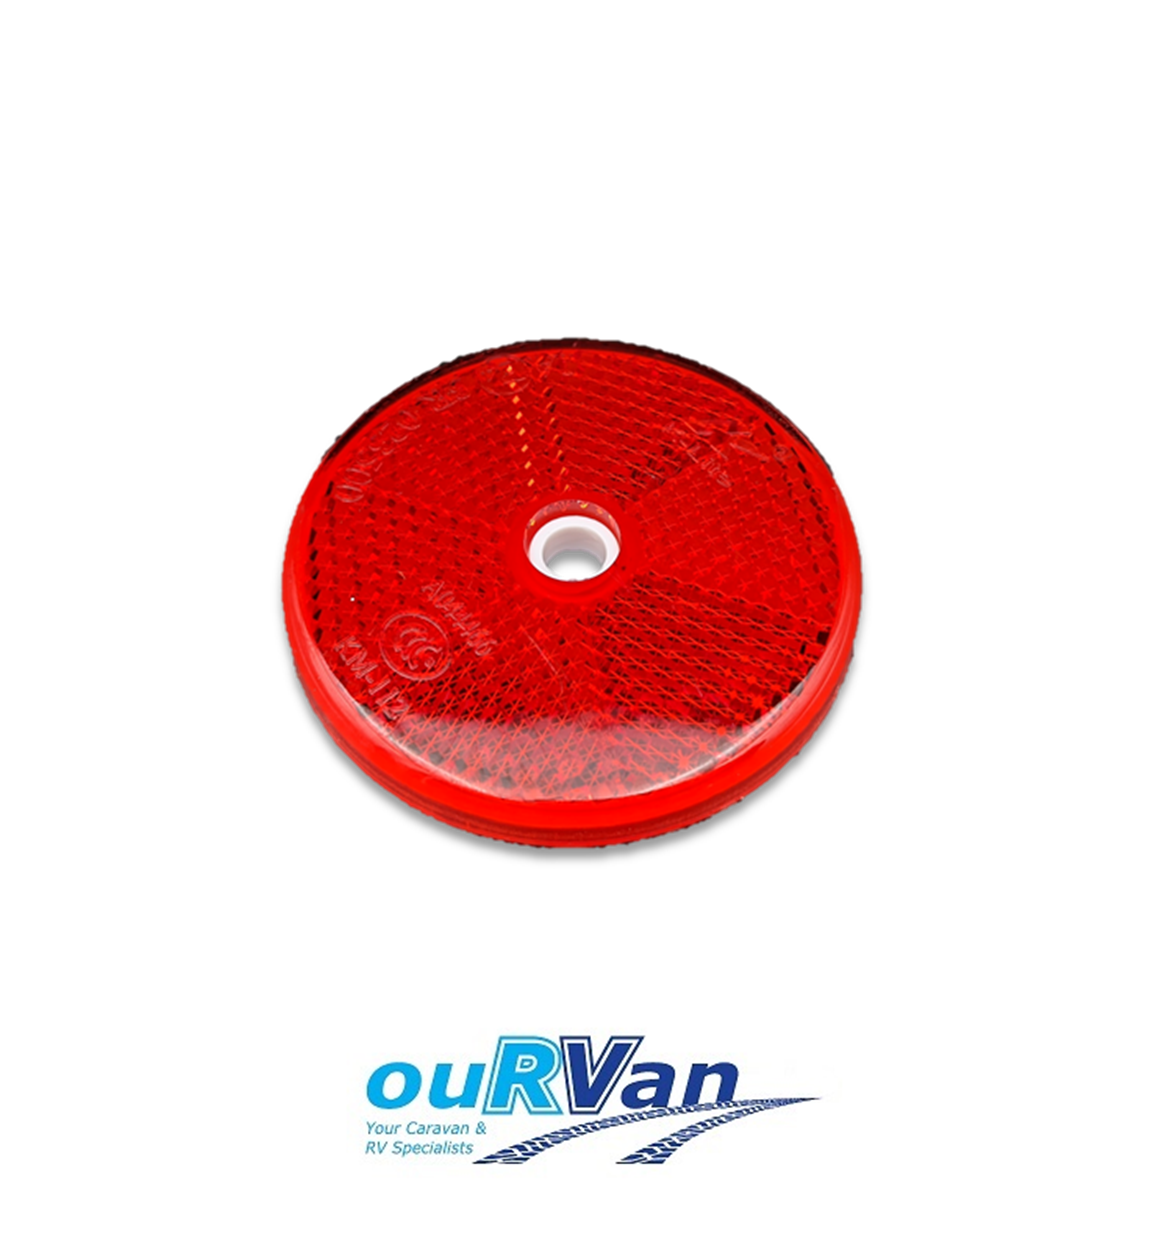 1 x 84012 EQUIVALENT 60mm DIAMETER RED SCREW ON REFLECTOR